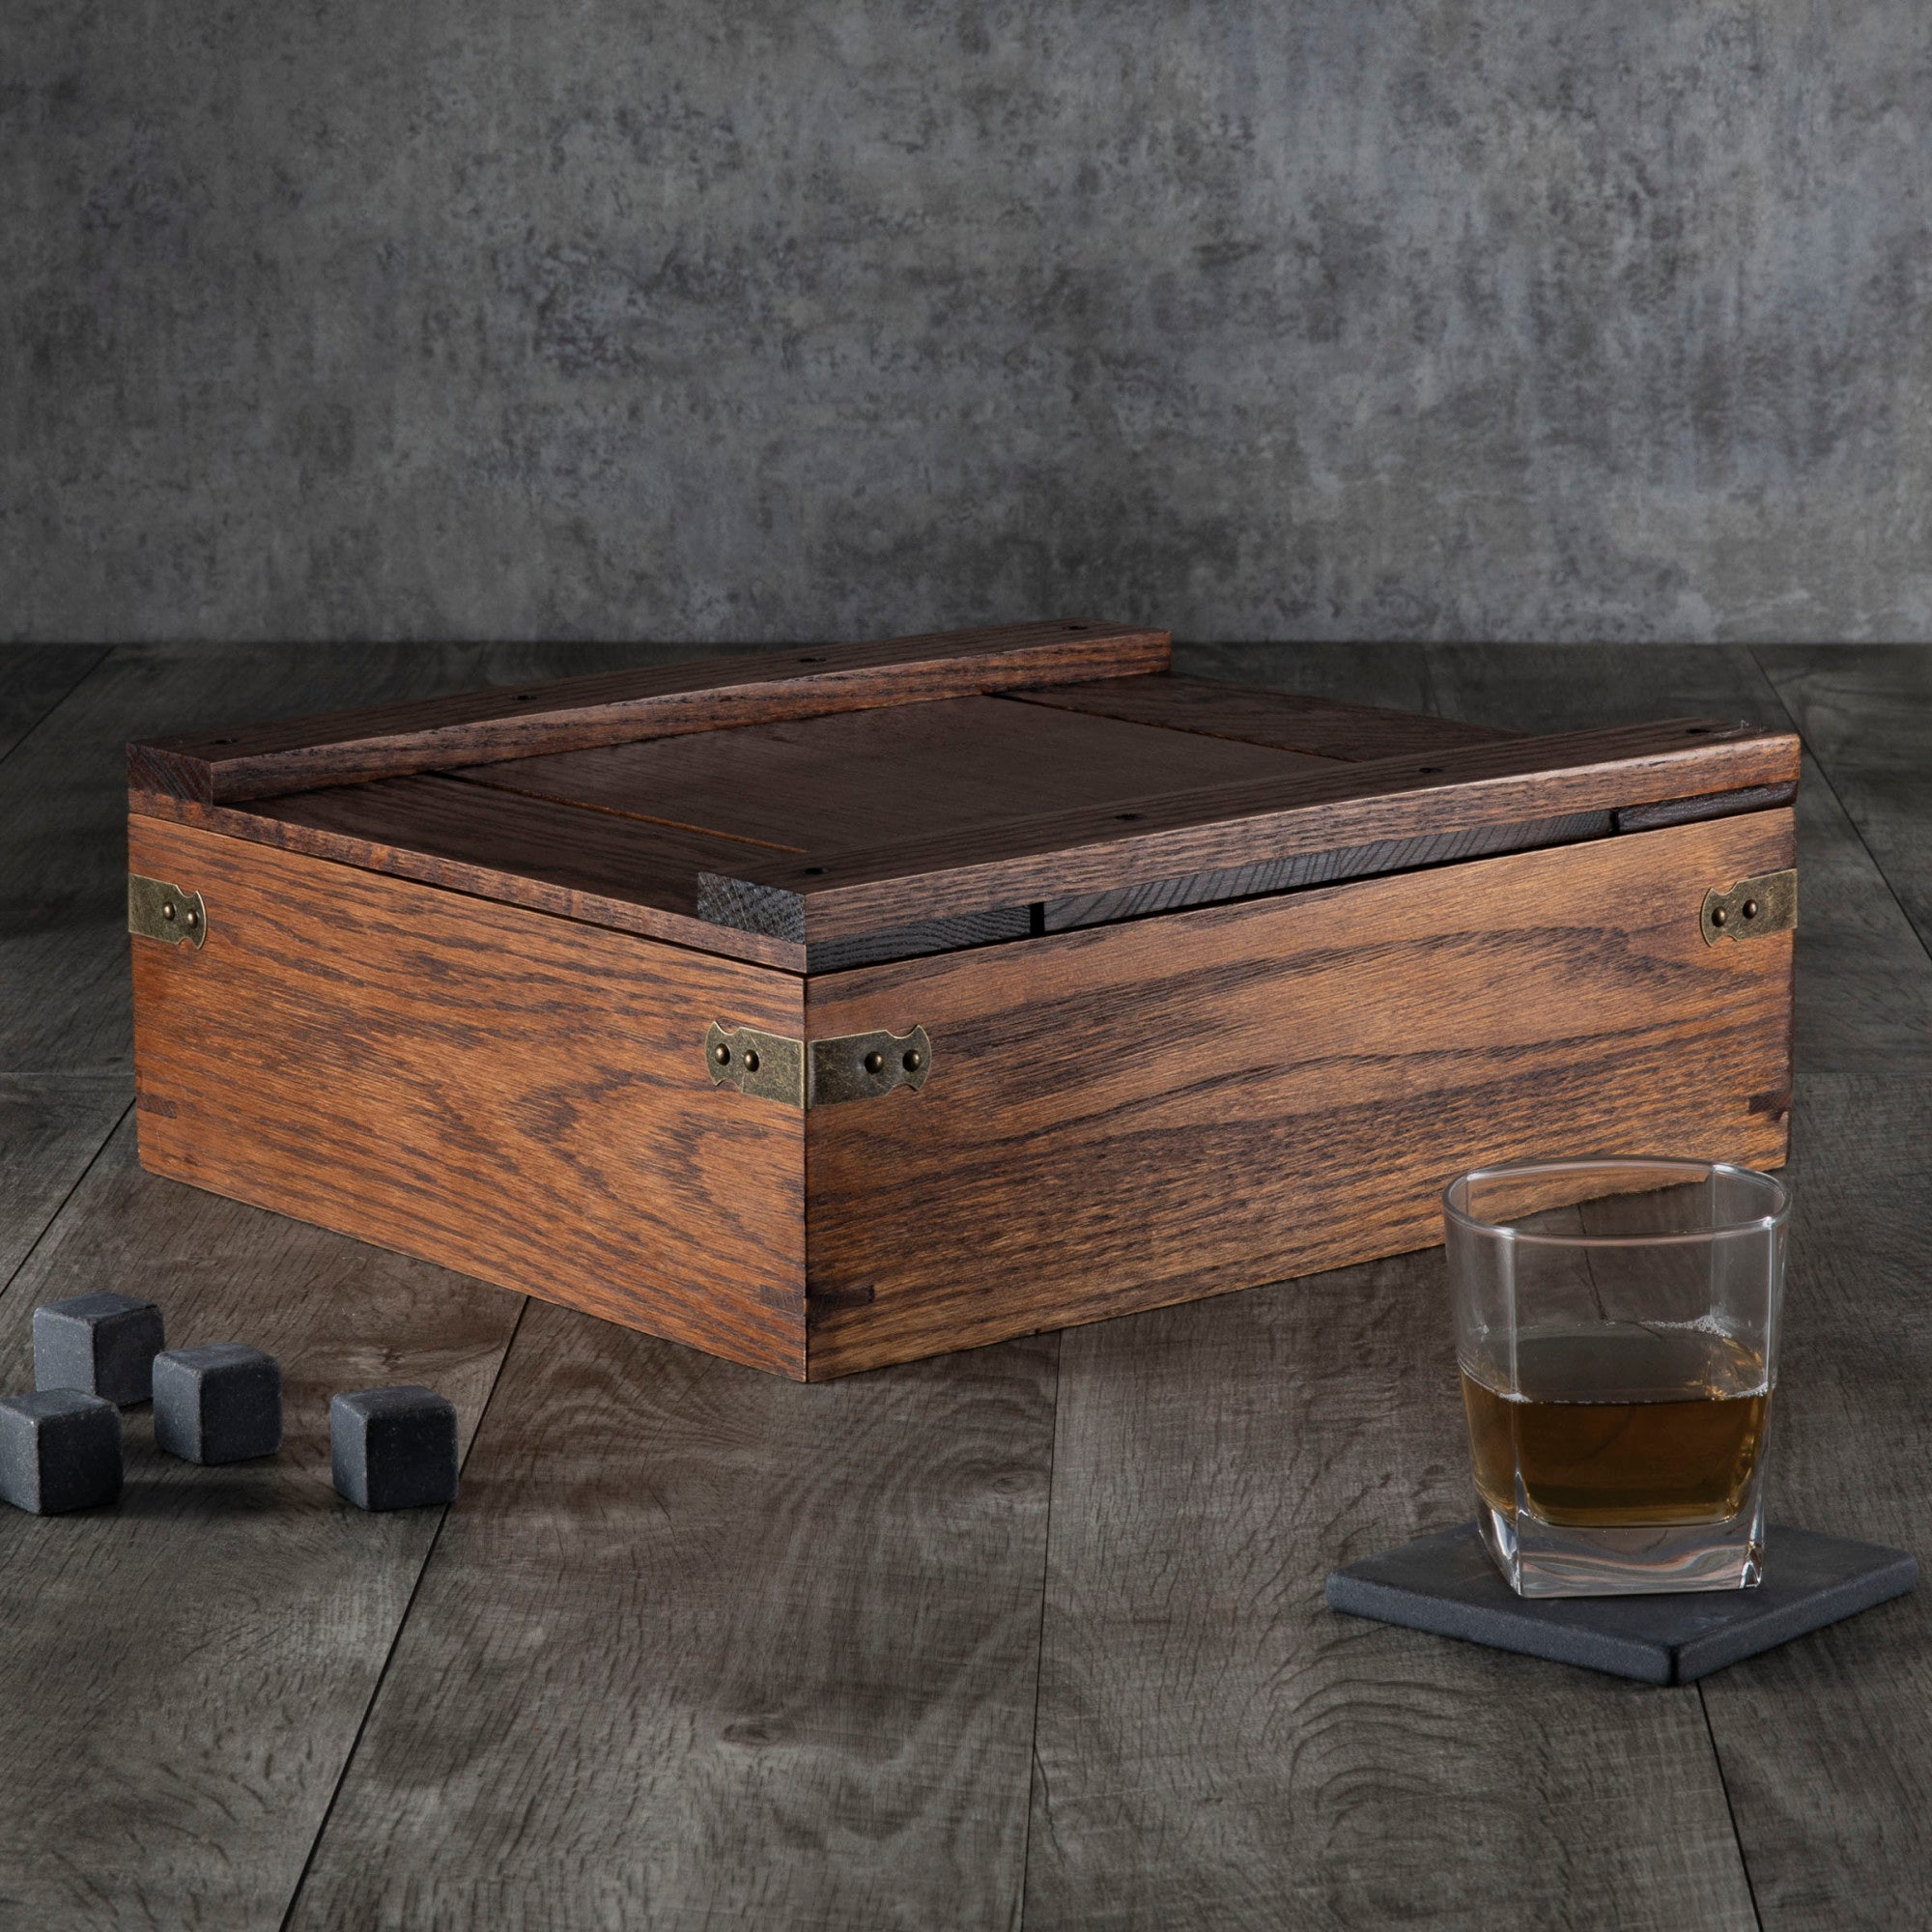 Chicago Cubs - Whiskey Box Gift Set